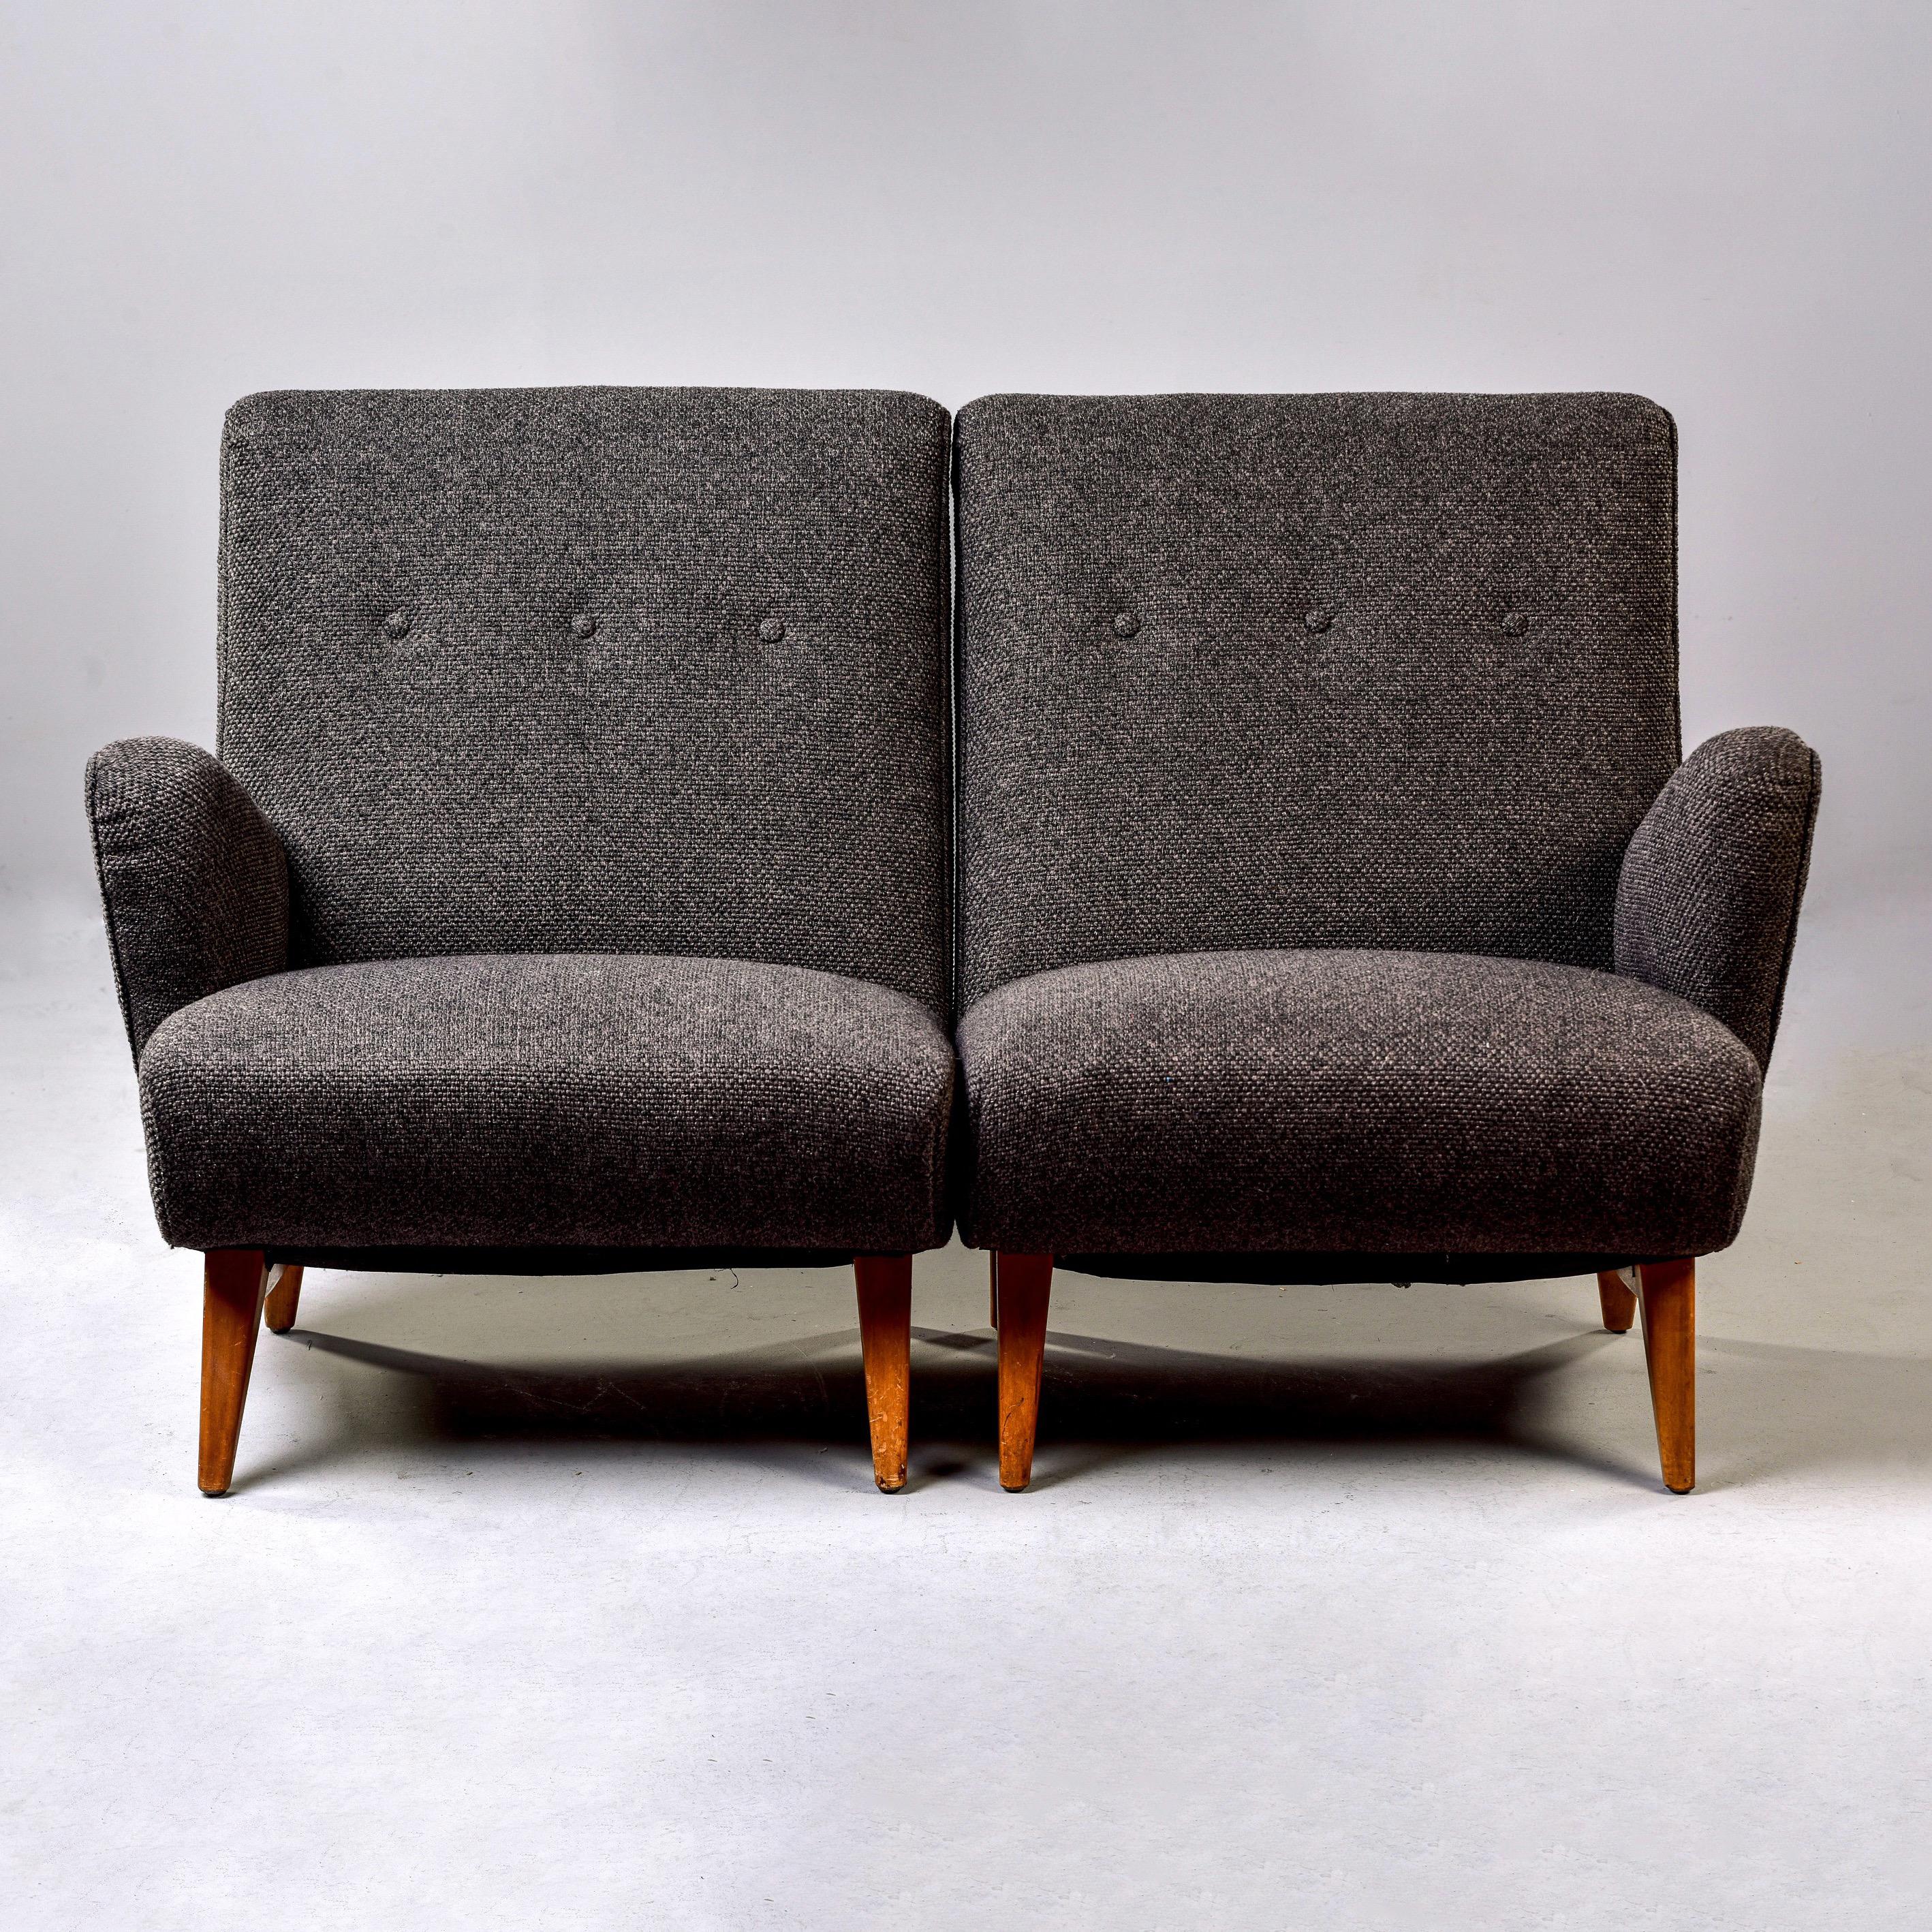 Circa 1948 two piece settee or pair of one arm chairs designed by Jens Risom for Knoll. These are extremely solid and comfortable pieces, well-built with hand-tied springs, tufted seat backs, angled arms and legs. This has been professionally